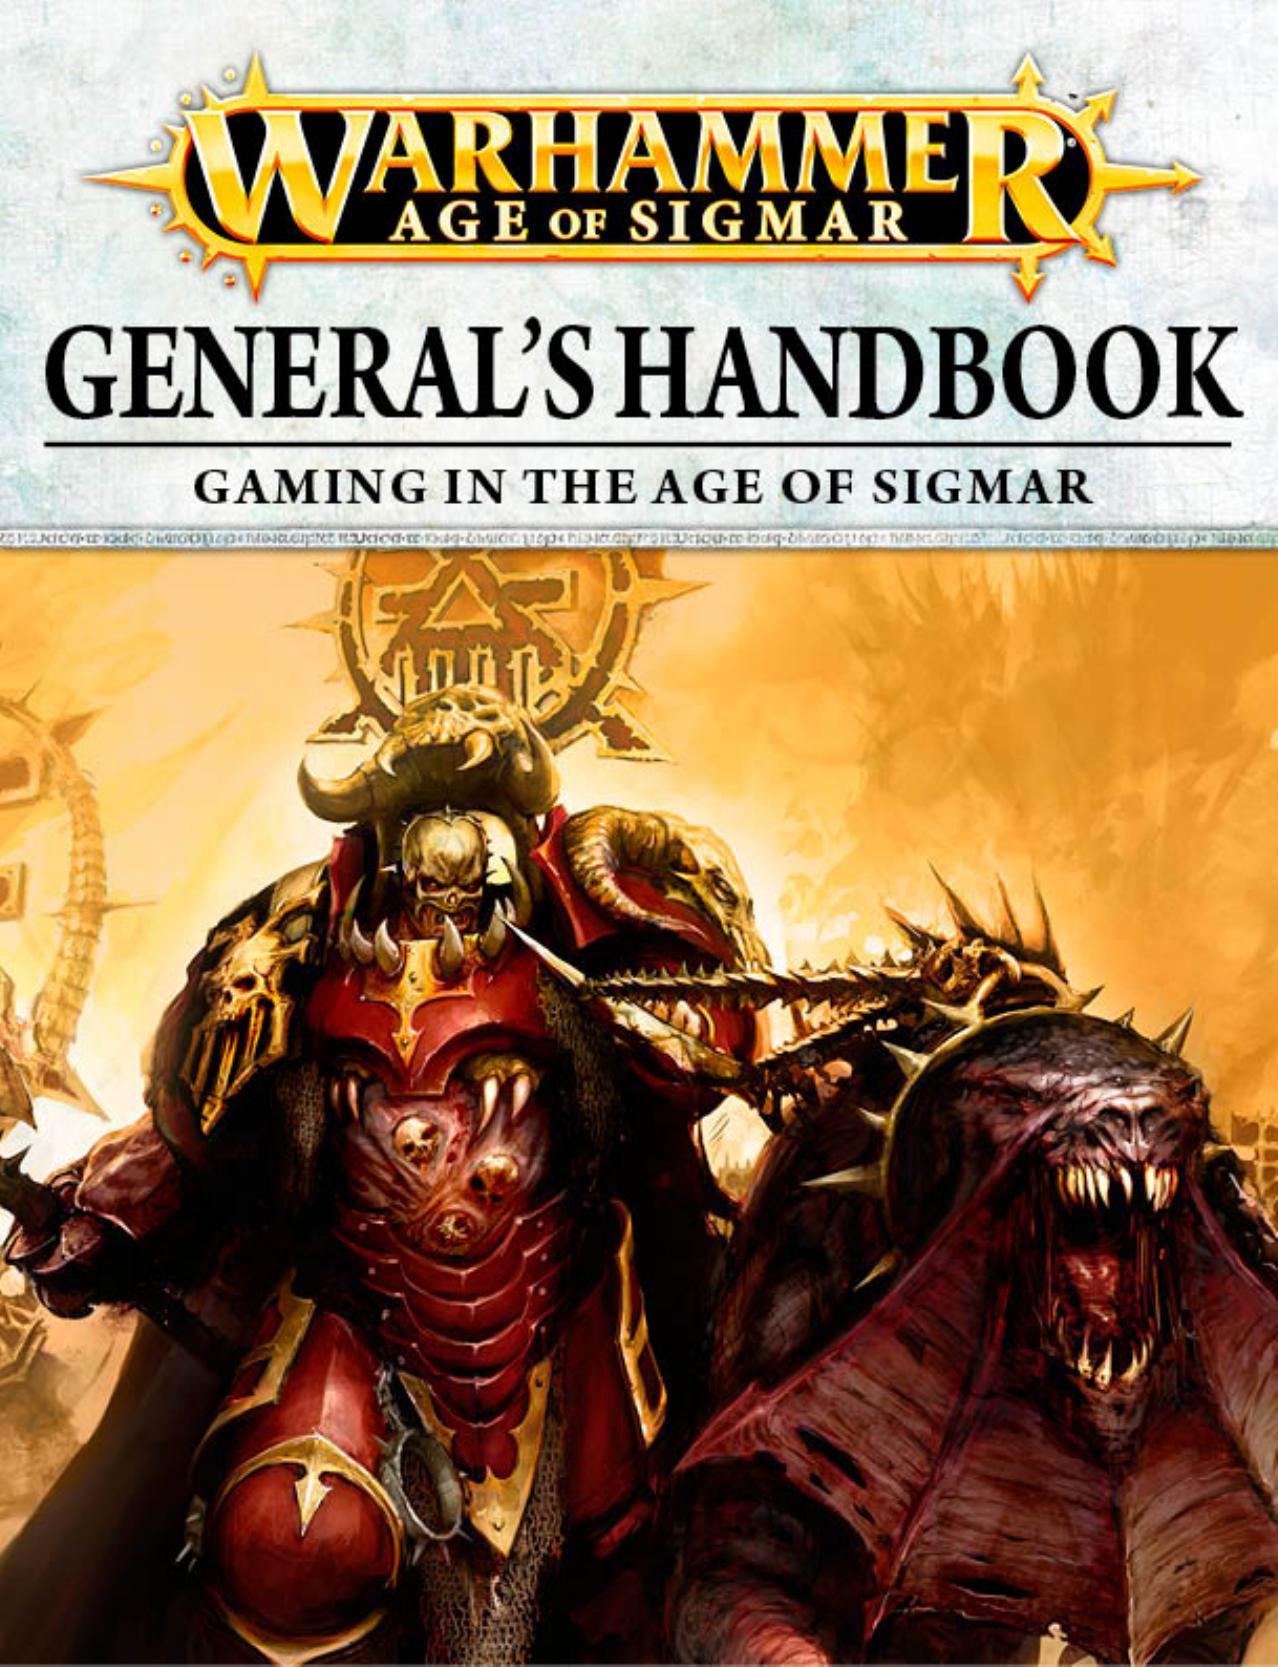 General's Handbook - Gaming in the Age of Sigmar